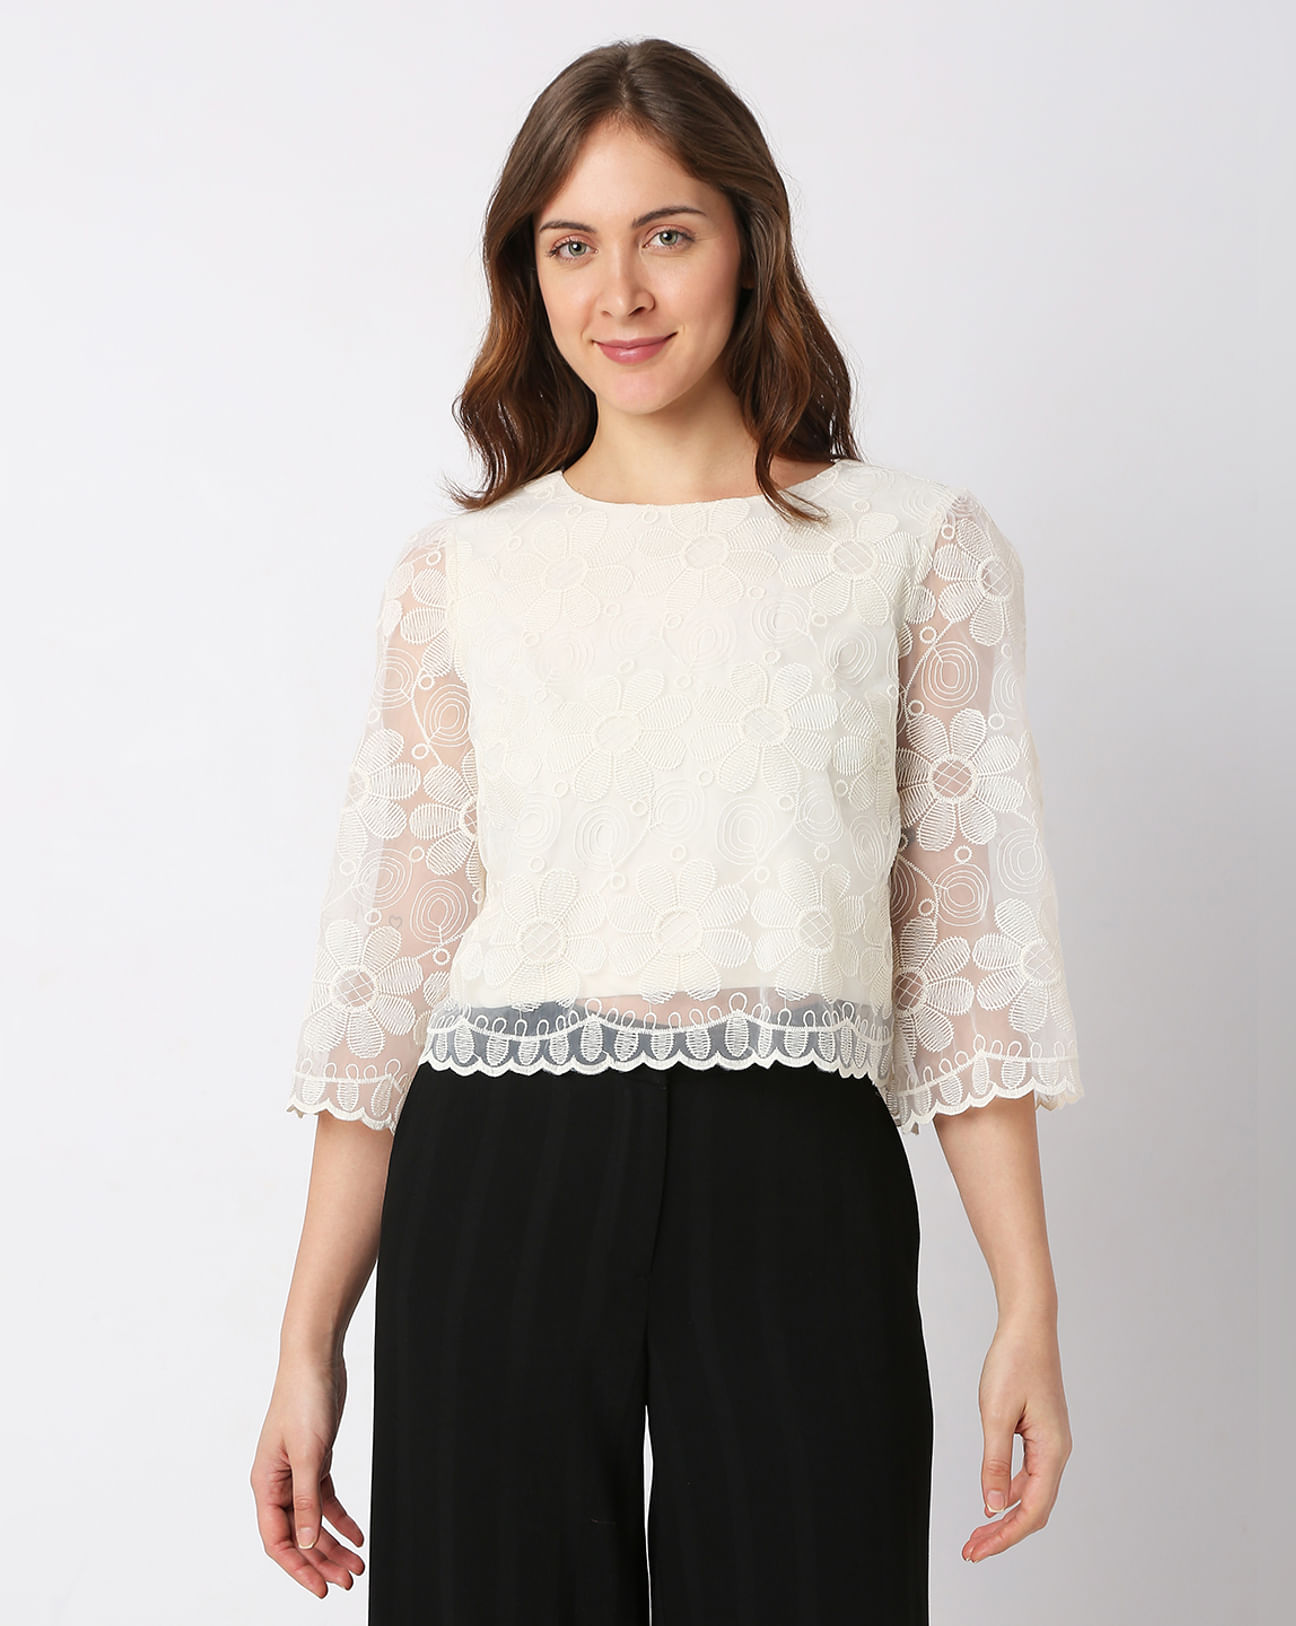 Buy Beige Embroidered Lace Top Women Online in India | VeroModa